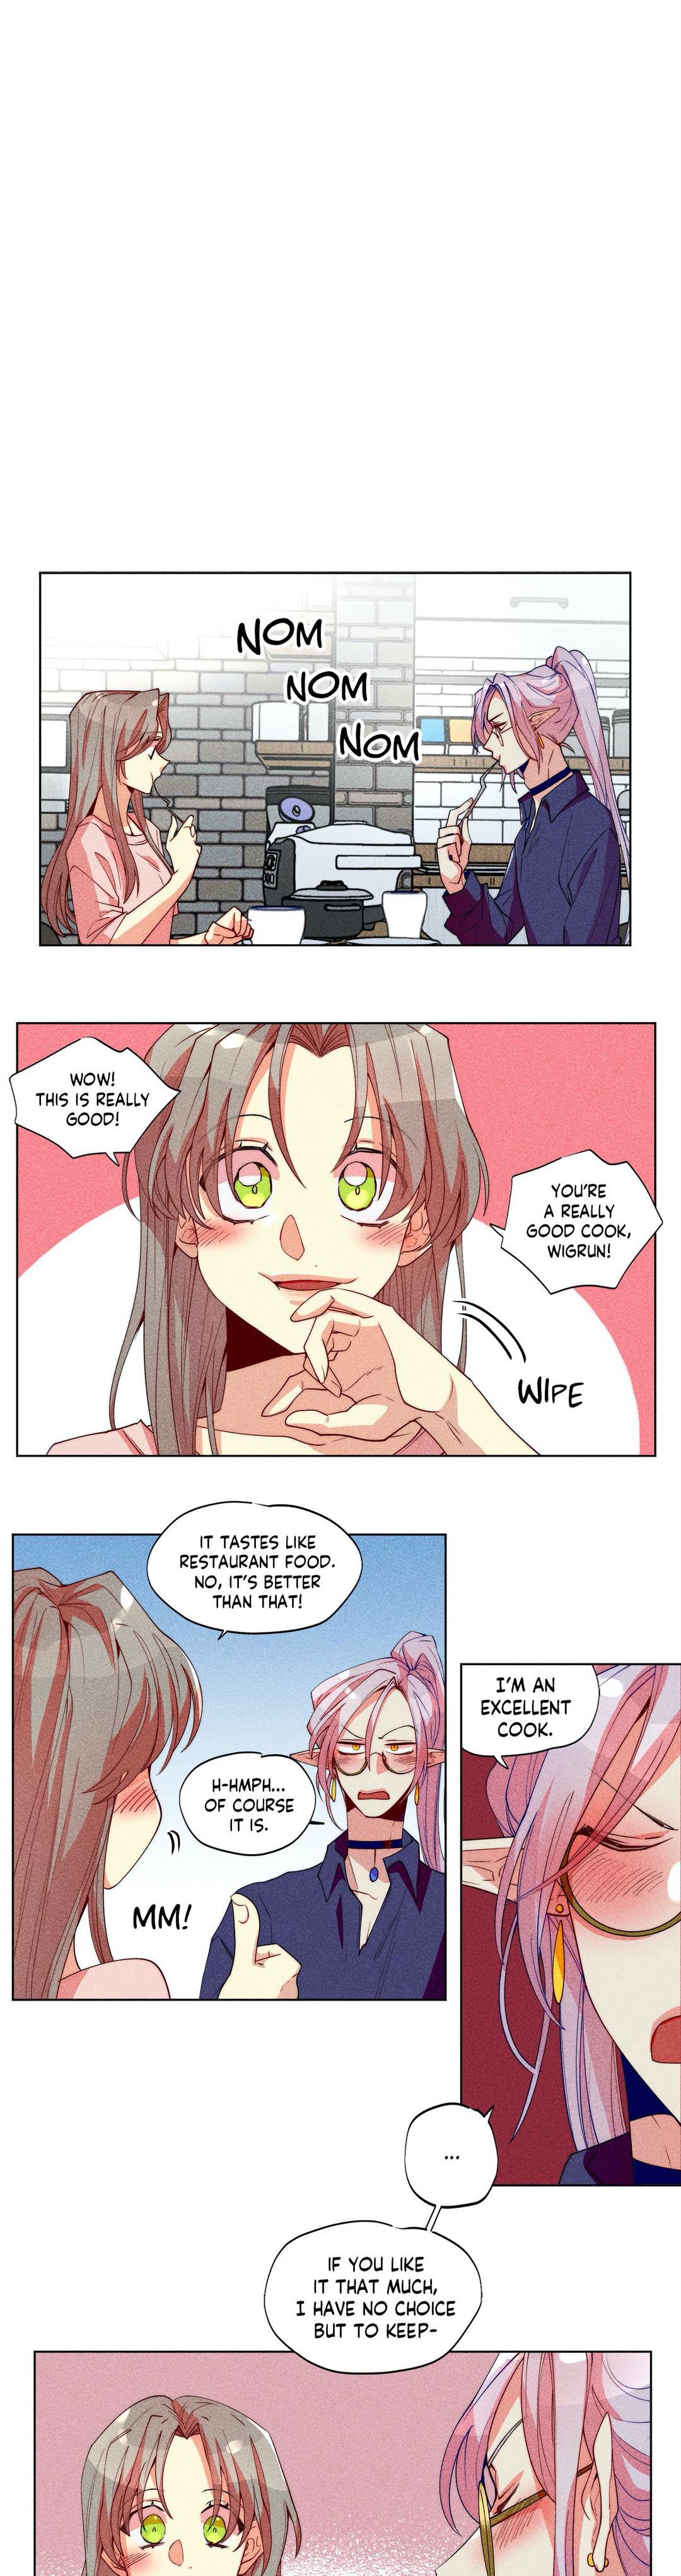 the-virgin-witch-chap-31-3